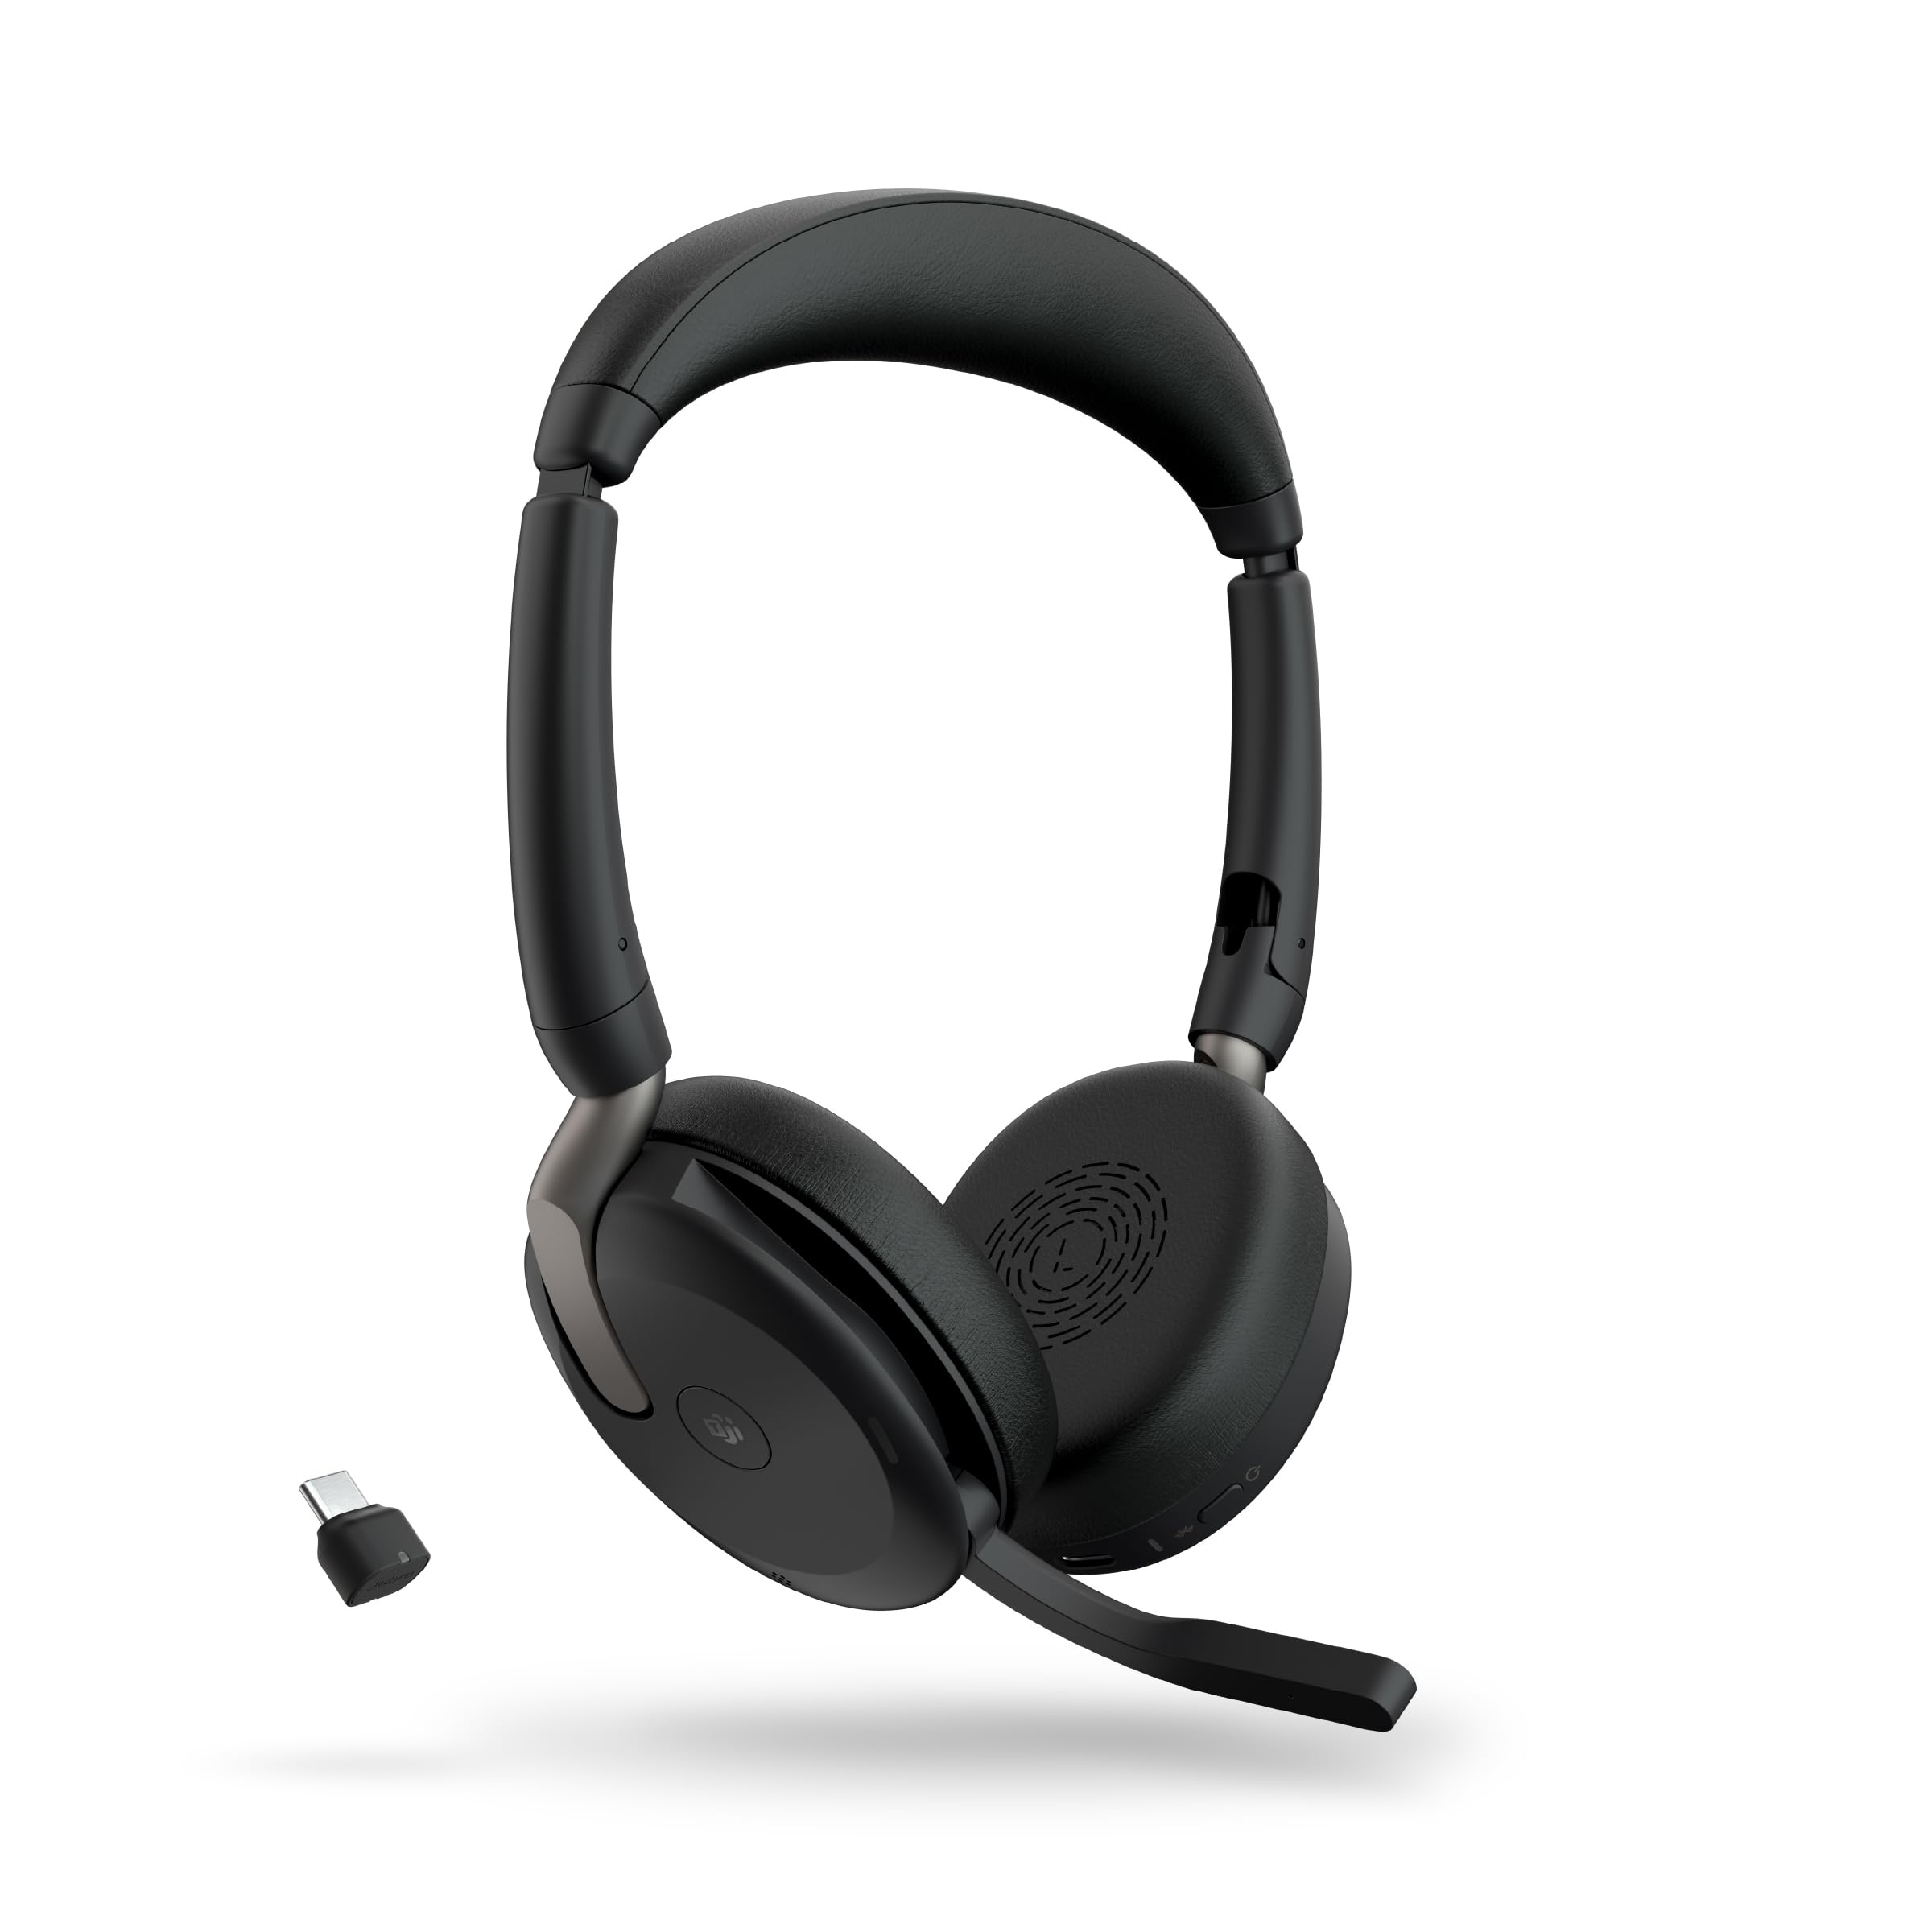 Jabra Evolve2 65 Flex Wireless Stereo Headset - Bluetooth, Noise-Cancelling ClearVoice Technology & Hybrid ANC - Certified for Microsoft Teams - Black